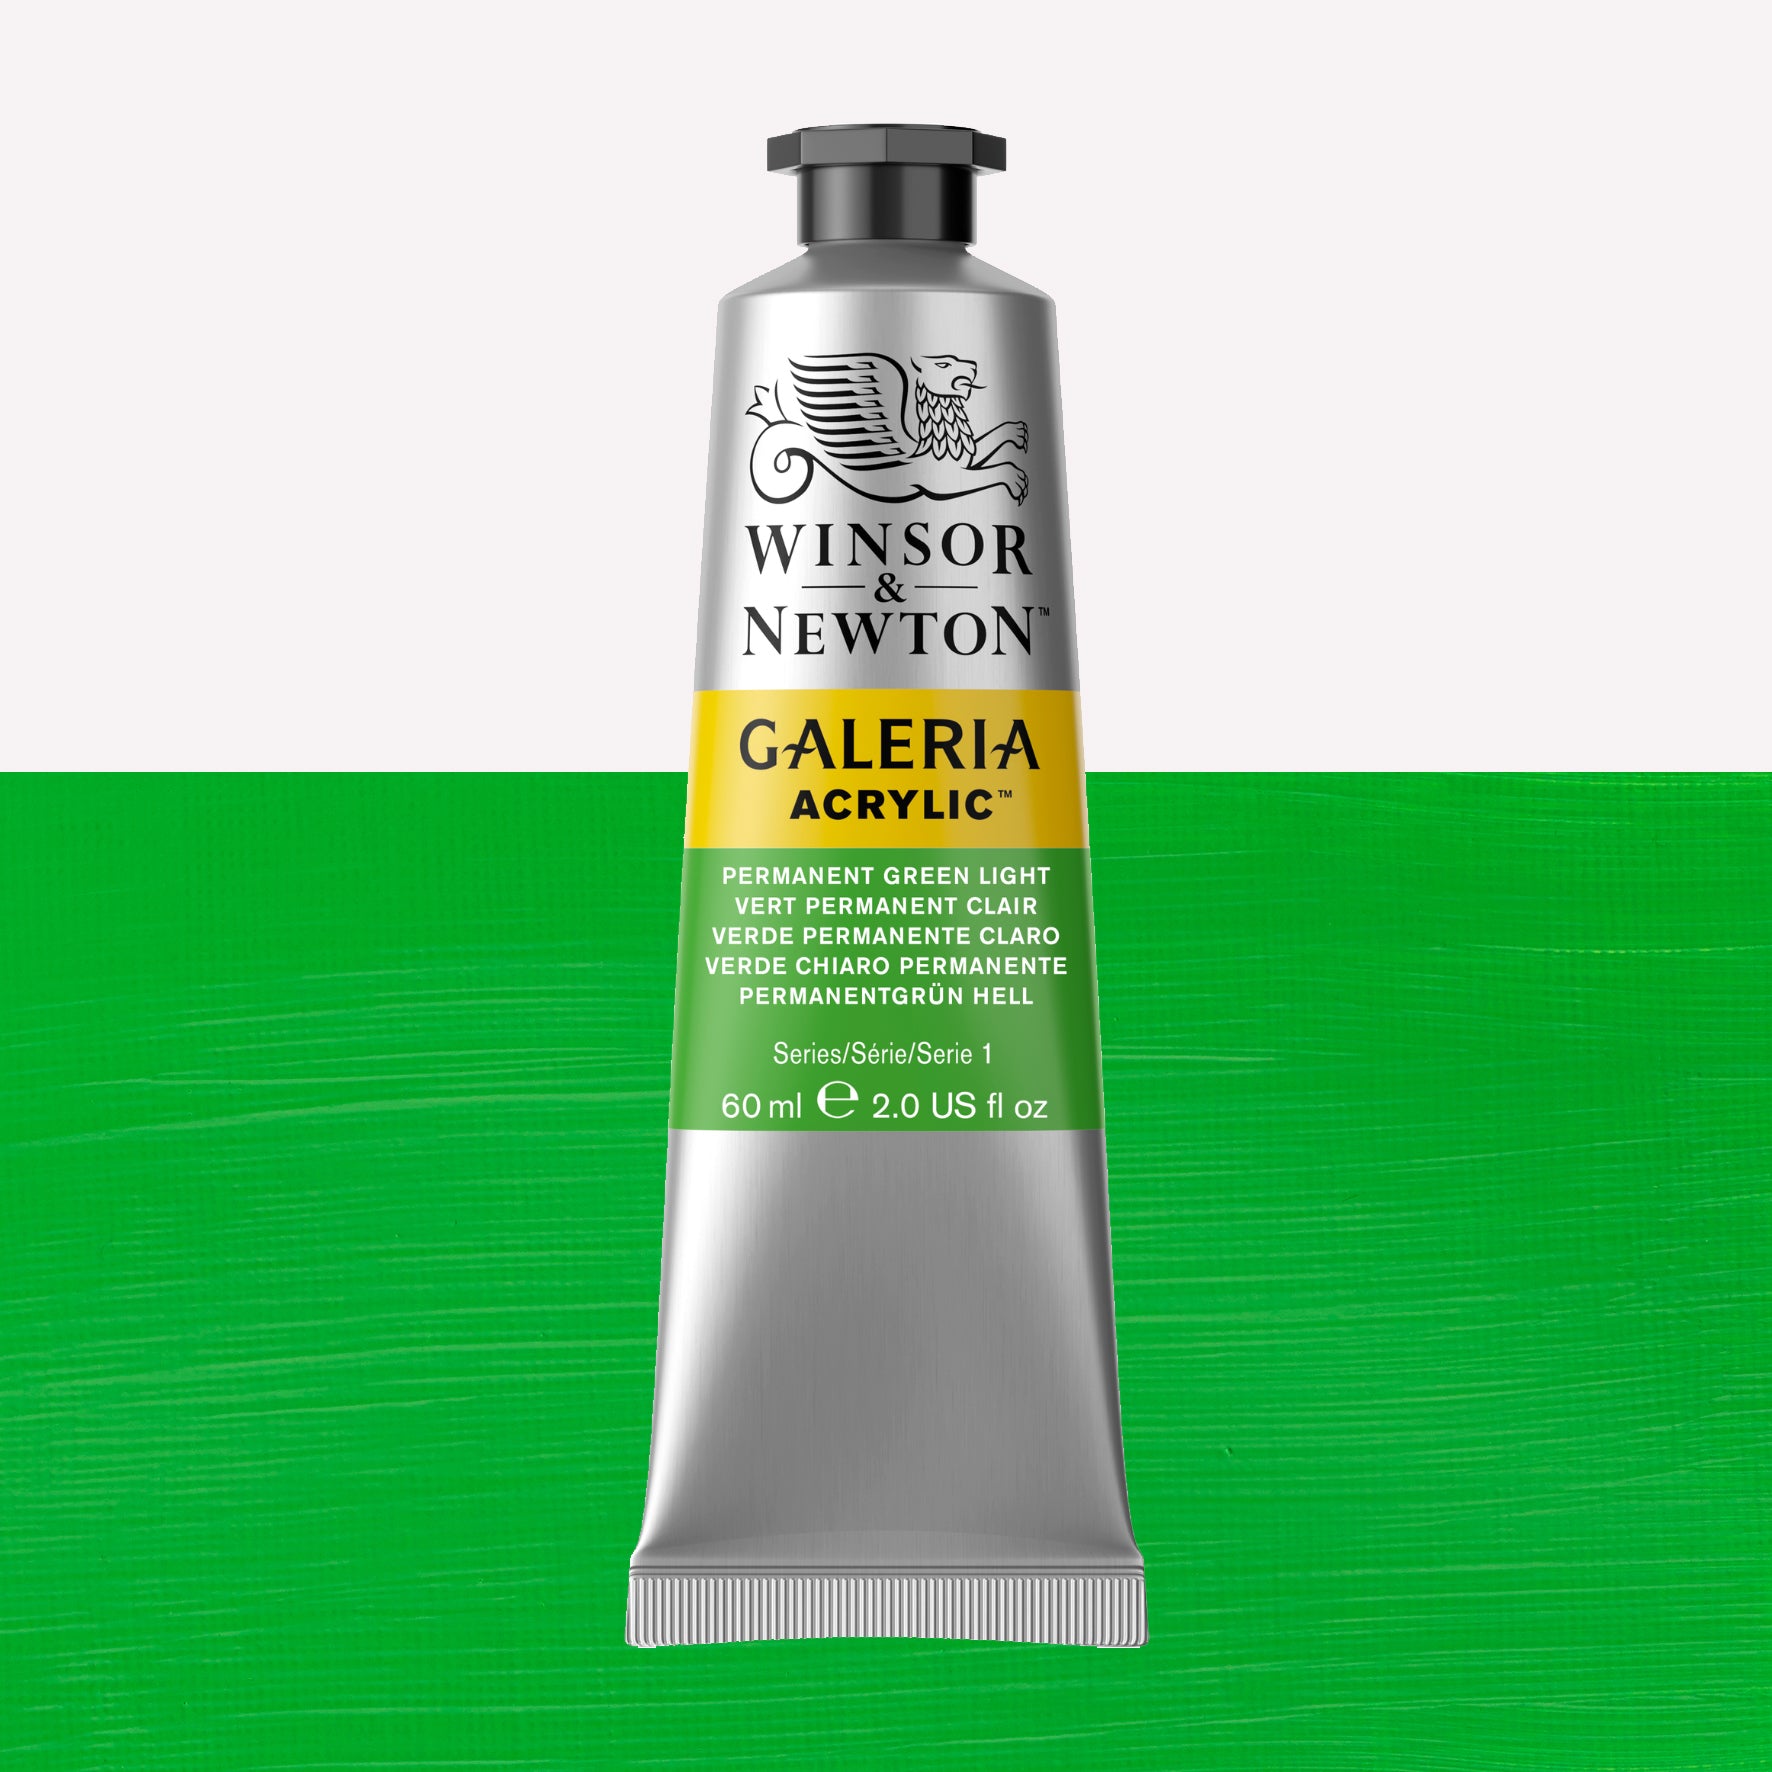 A 60ml tube of vibrant Galeria Acrylic paint in the shade Permanent Green Light. This professional-quality paint is packaged in a silver tube with a black lid. Made by Winsor and Newton.